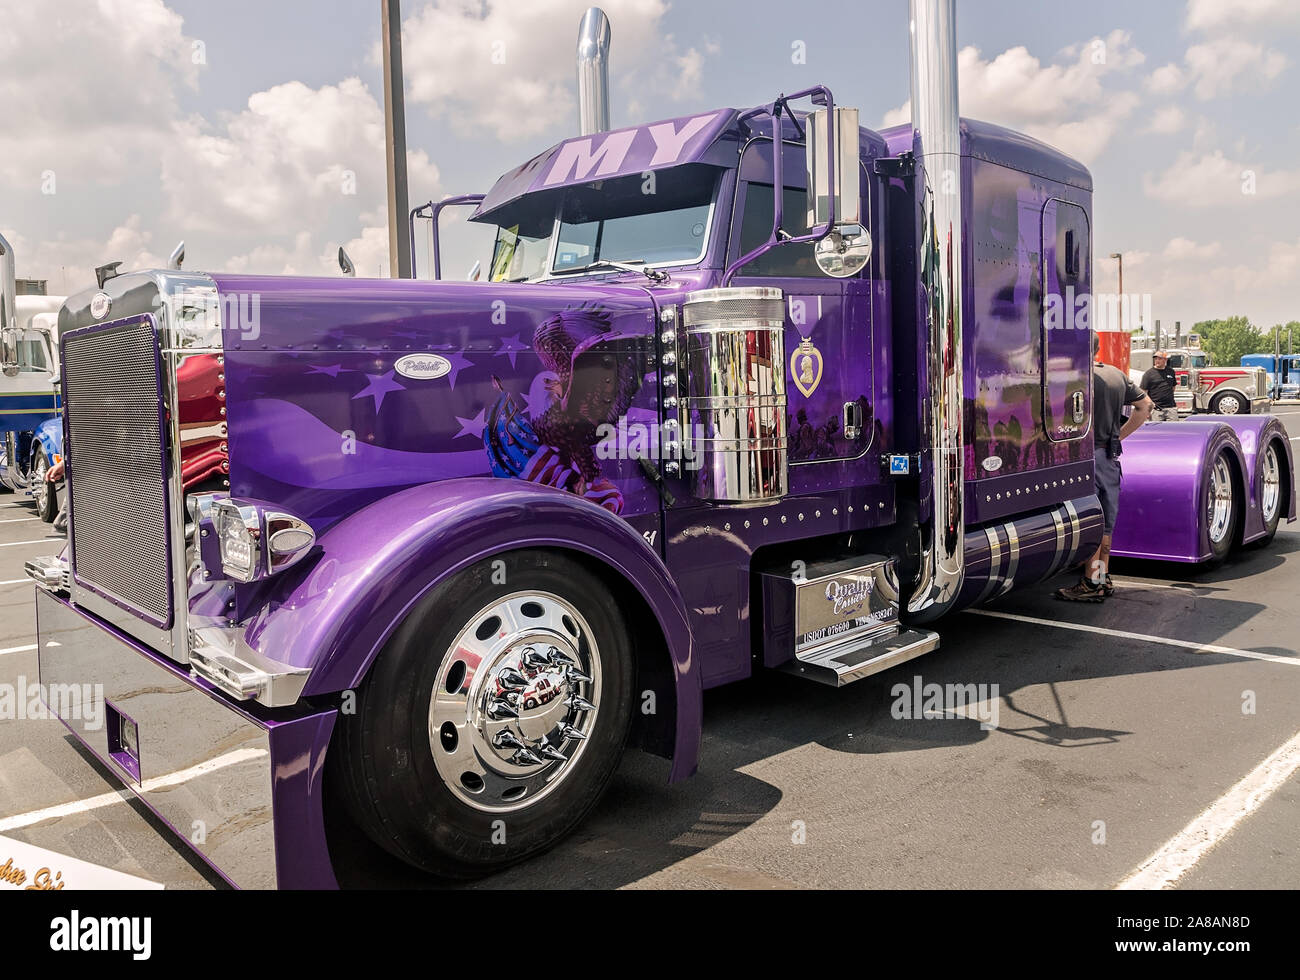 A 2006 Peterbilt 379 Flat Top waits to be judged at the 34th annual Shell Rotella SuperRigs truck beauty contest, June 11, 2016, in Joplin, Missouri. Stock Photo